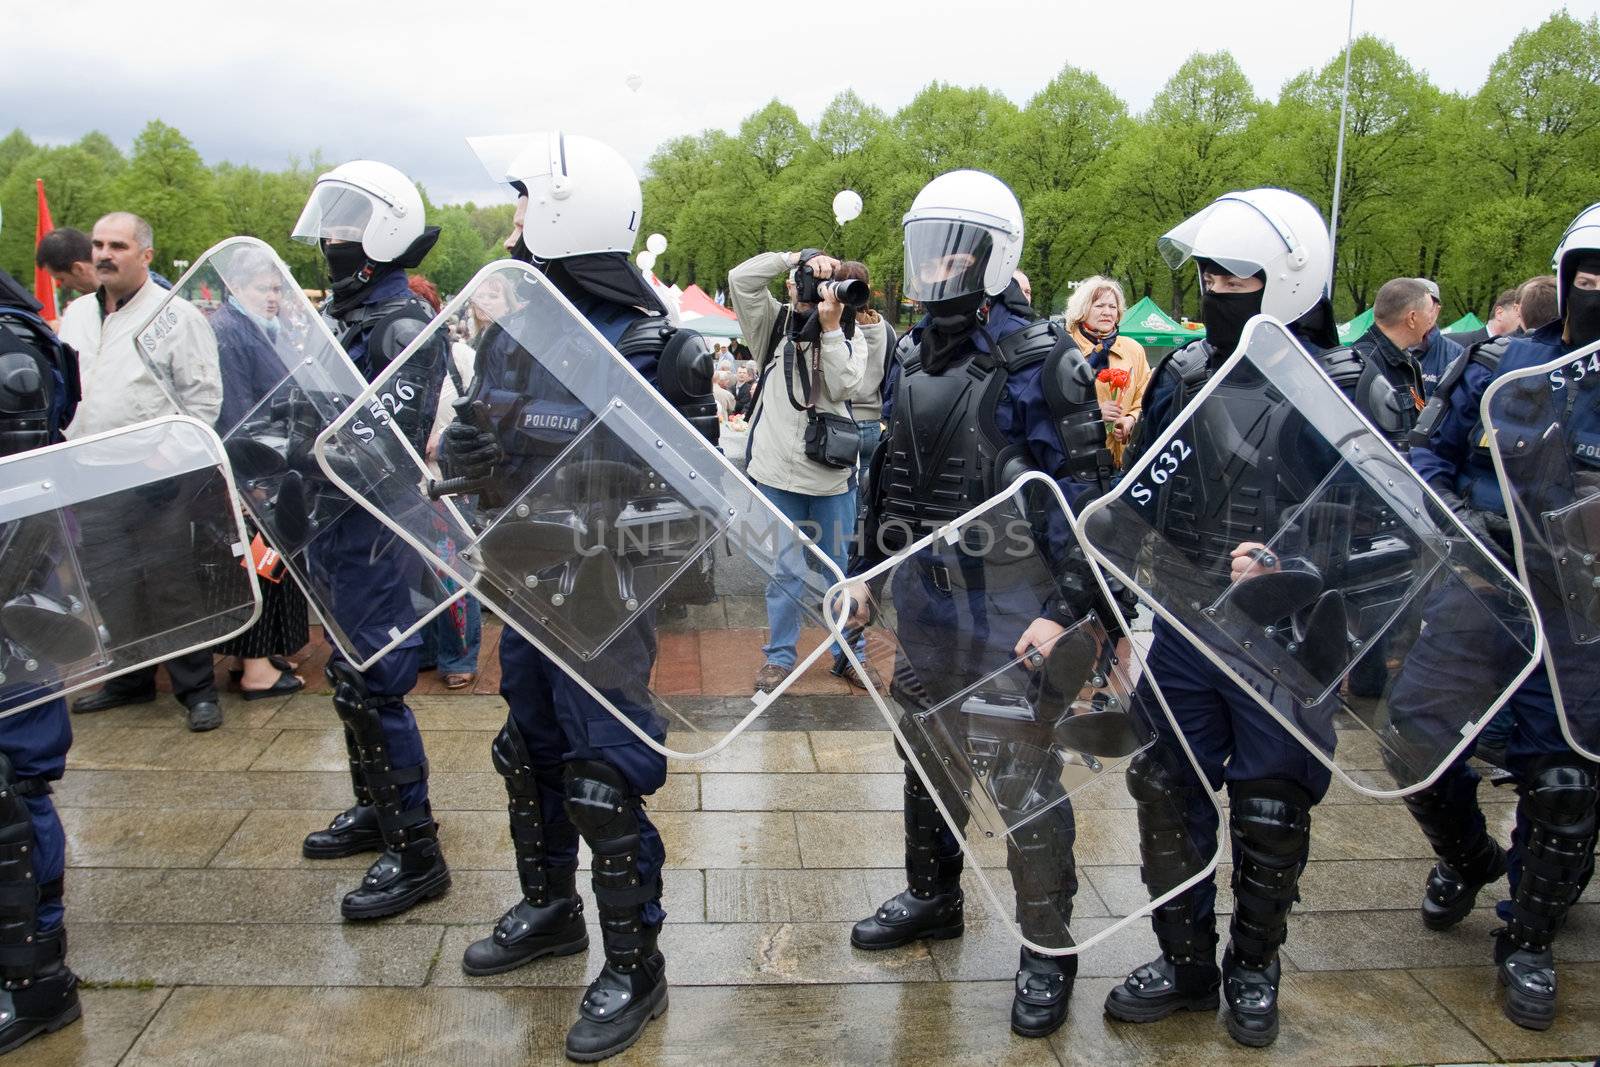 RIGA, LATVIA, MAY 9, 2009: Riot police ready to exclude provocation at Celebration of May 9 Victory Day (Eastern Europe) in Riga at Victory Memorial to Soviet Army